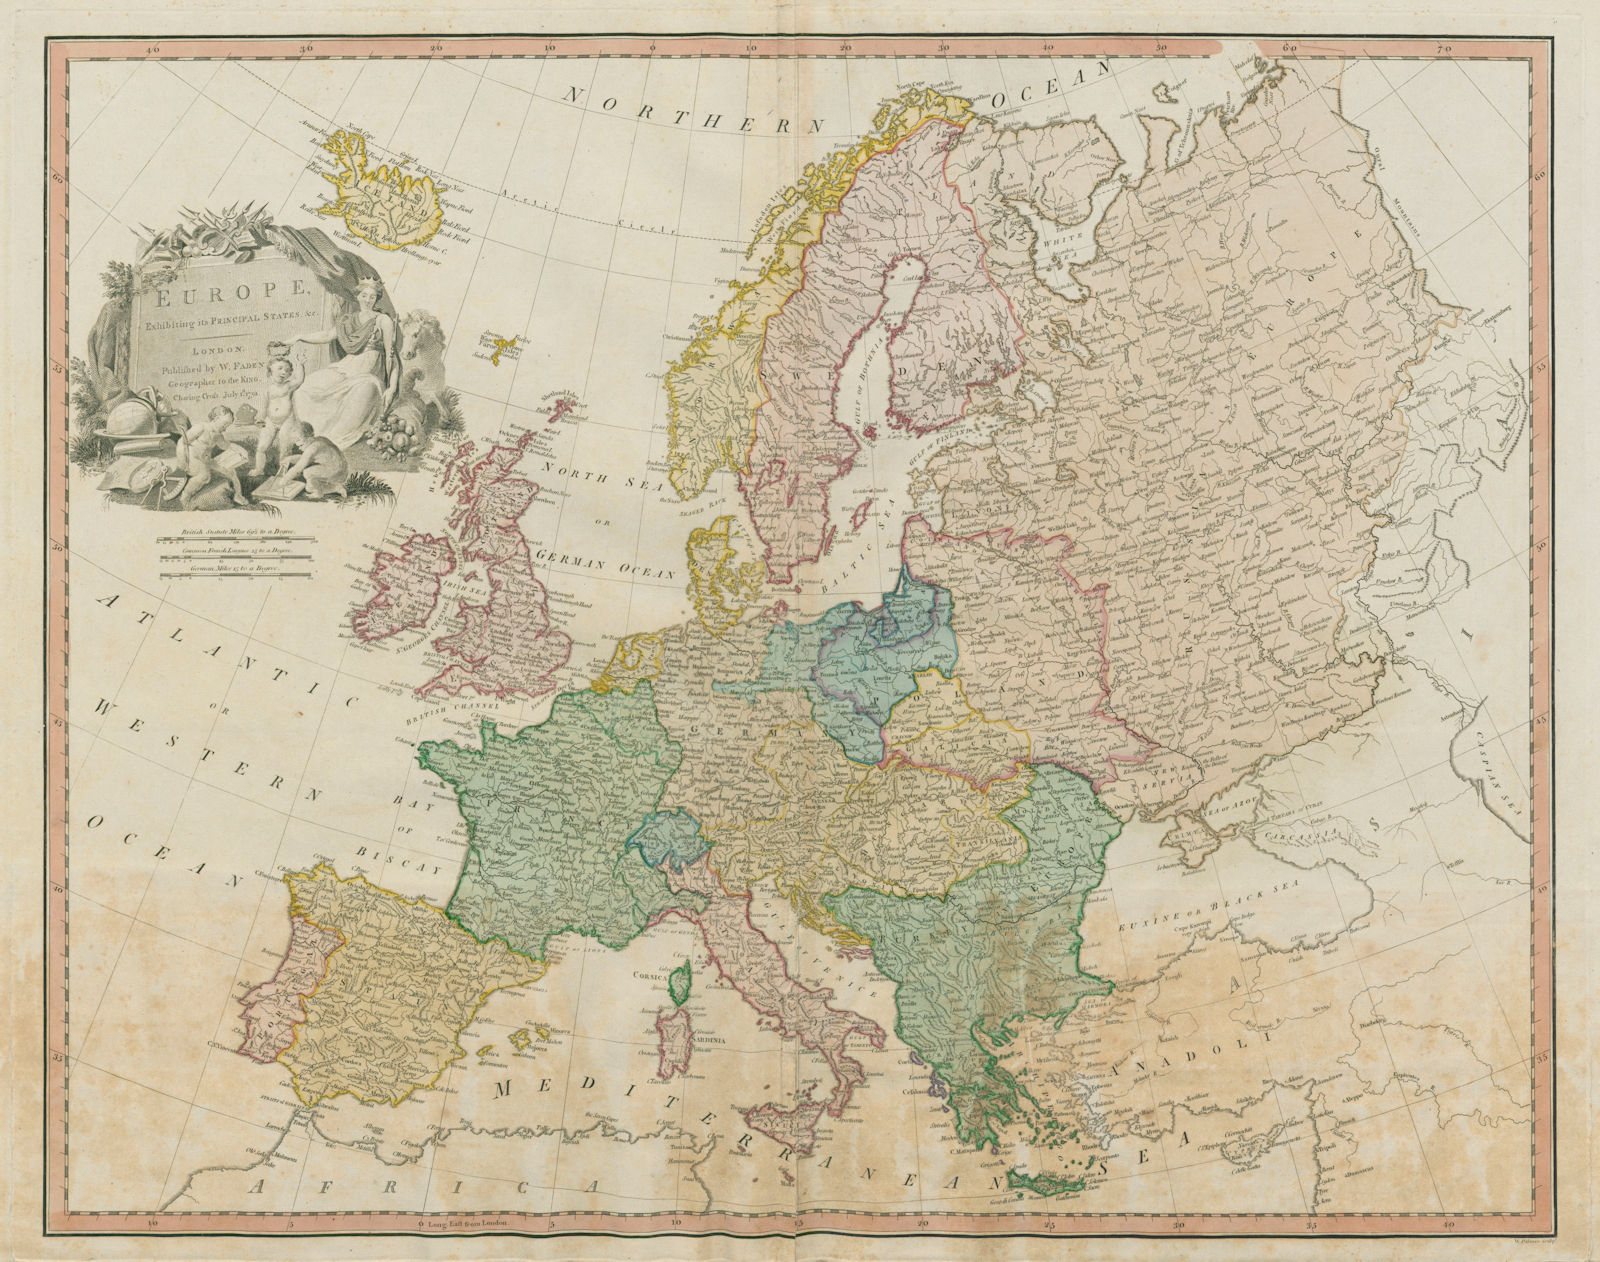 Associate Product Europe exhibiting its principal states &c. First French Empire. FADEN 1791 map